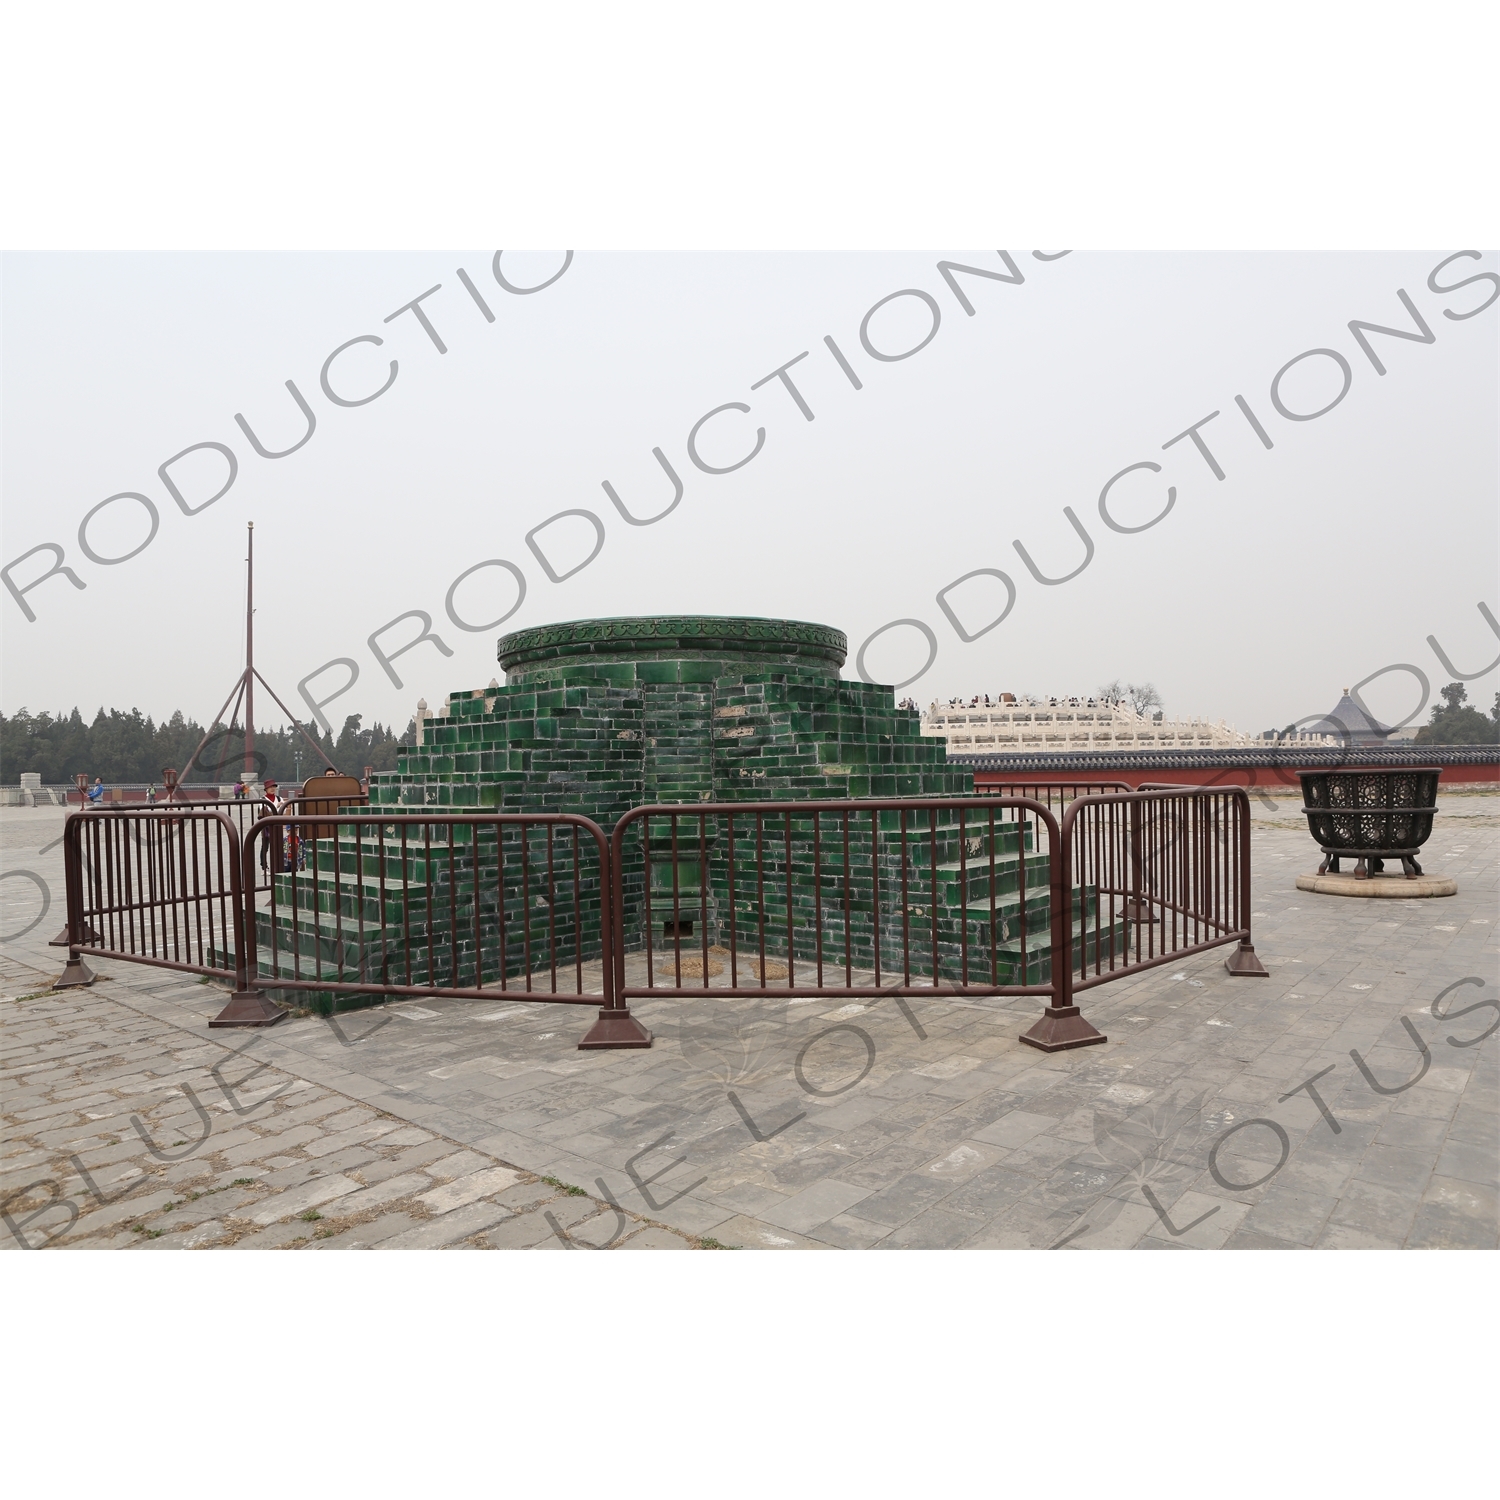 Sacrificial Stove, Sacrificial Brazier, 'Viewing Lantern Pole' and Circular Mound Altar (Yuanqiu Tan) Compound in the Temple of Heaven (Tiantan) in Beijing